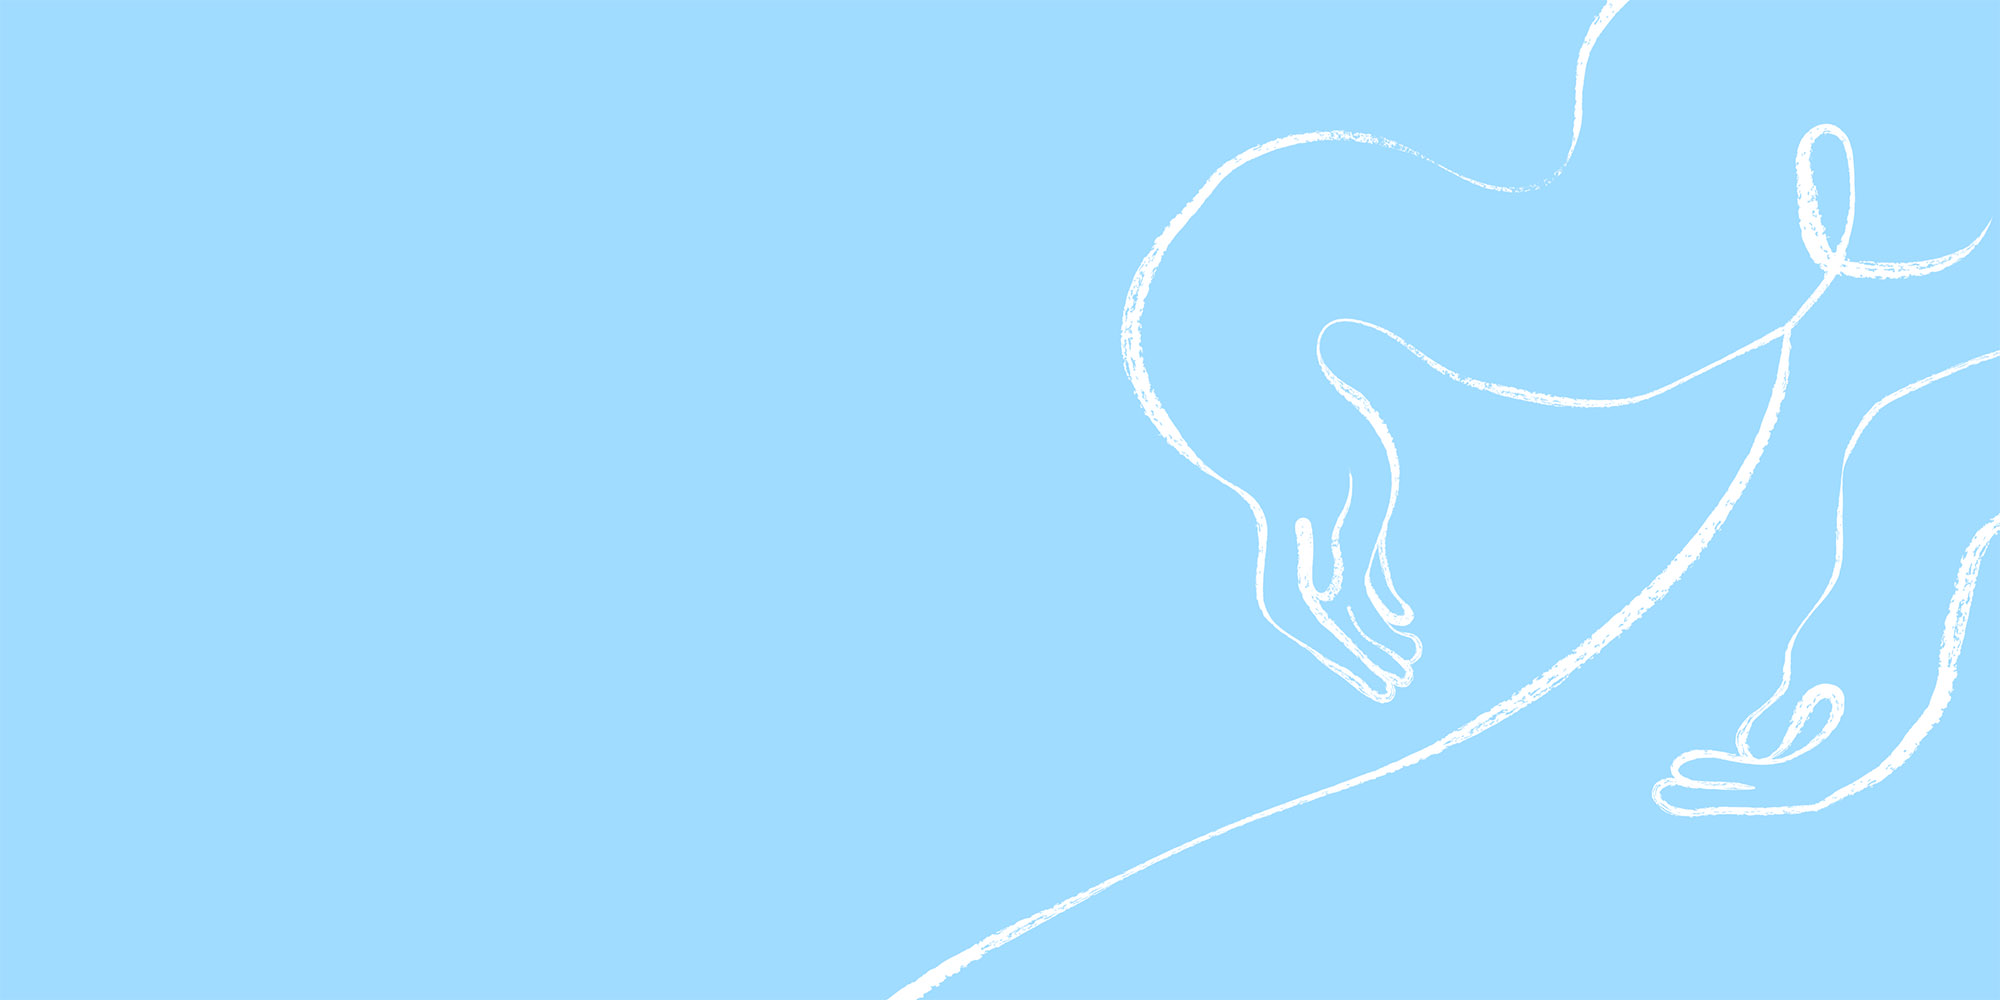 An organic human figure drawn in loose white brush strokes on a background of light blue